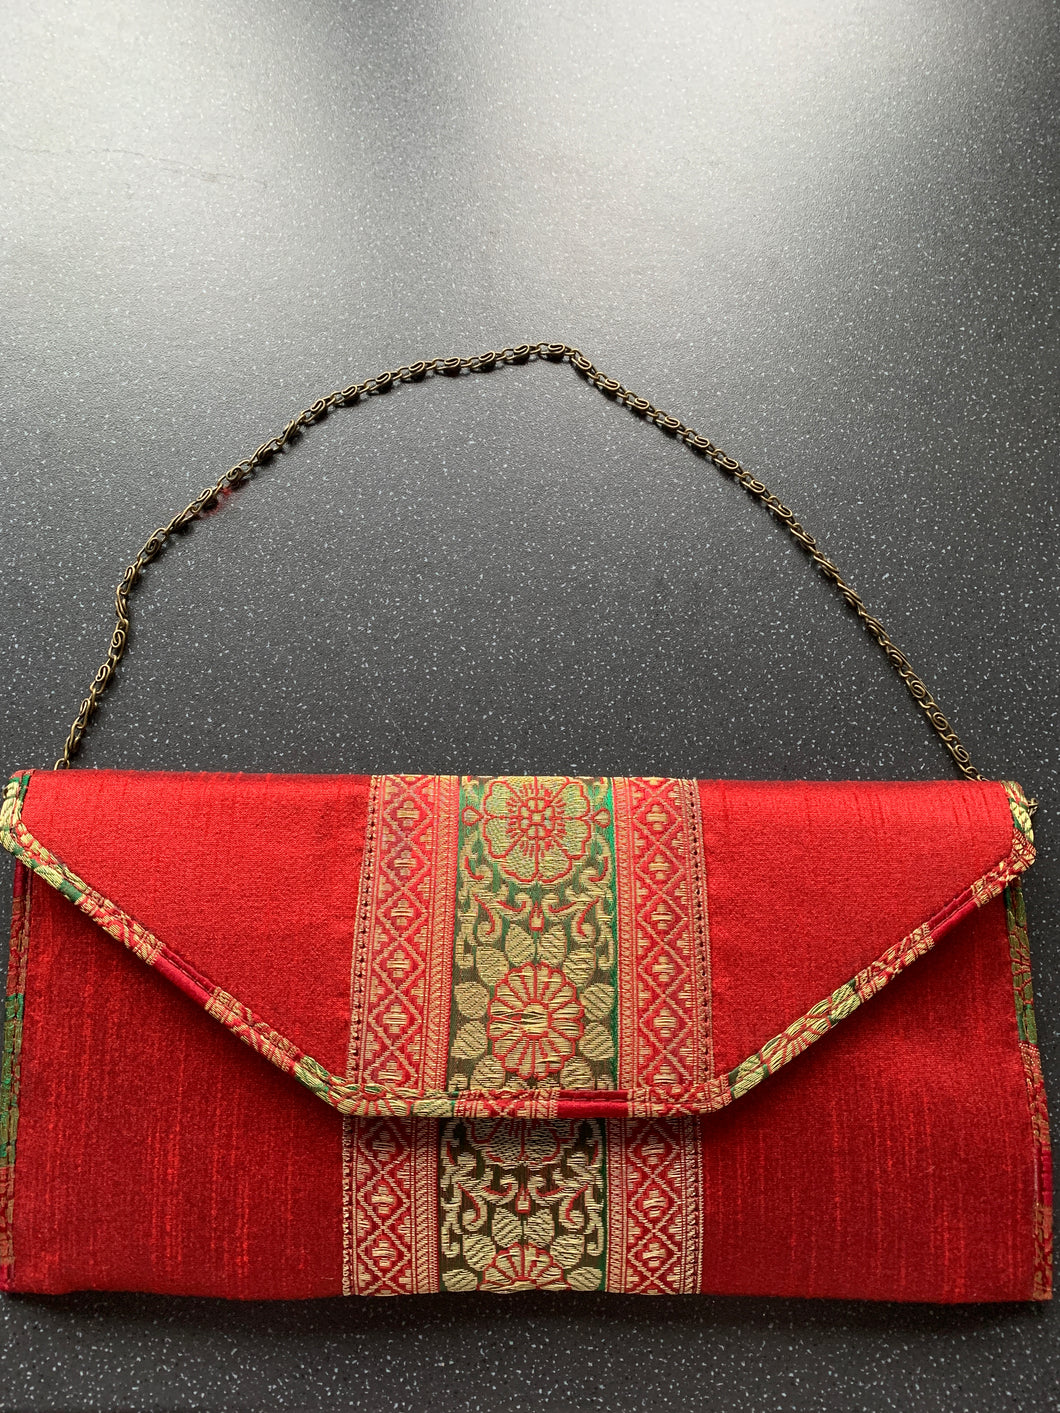 Make Your Wishes Come Good Luck Red Green Clutch Purse With Chain Raw Silk